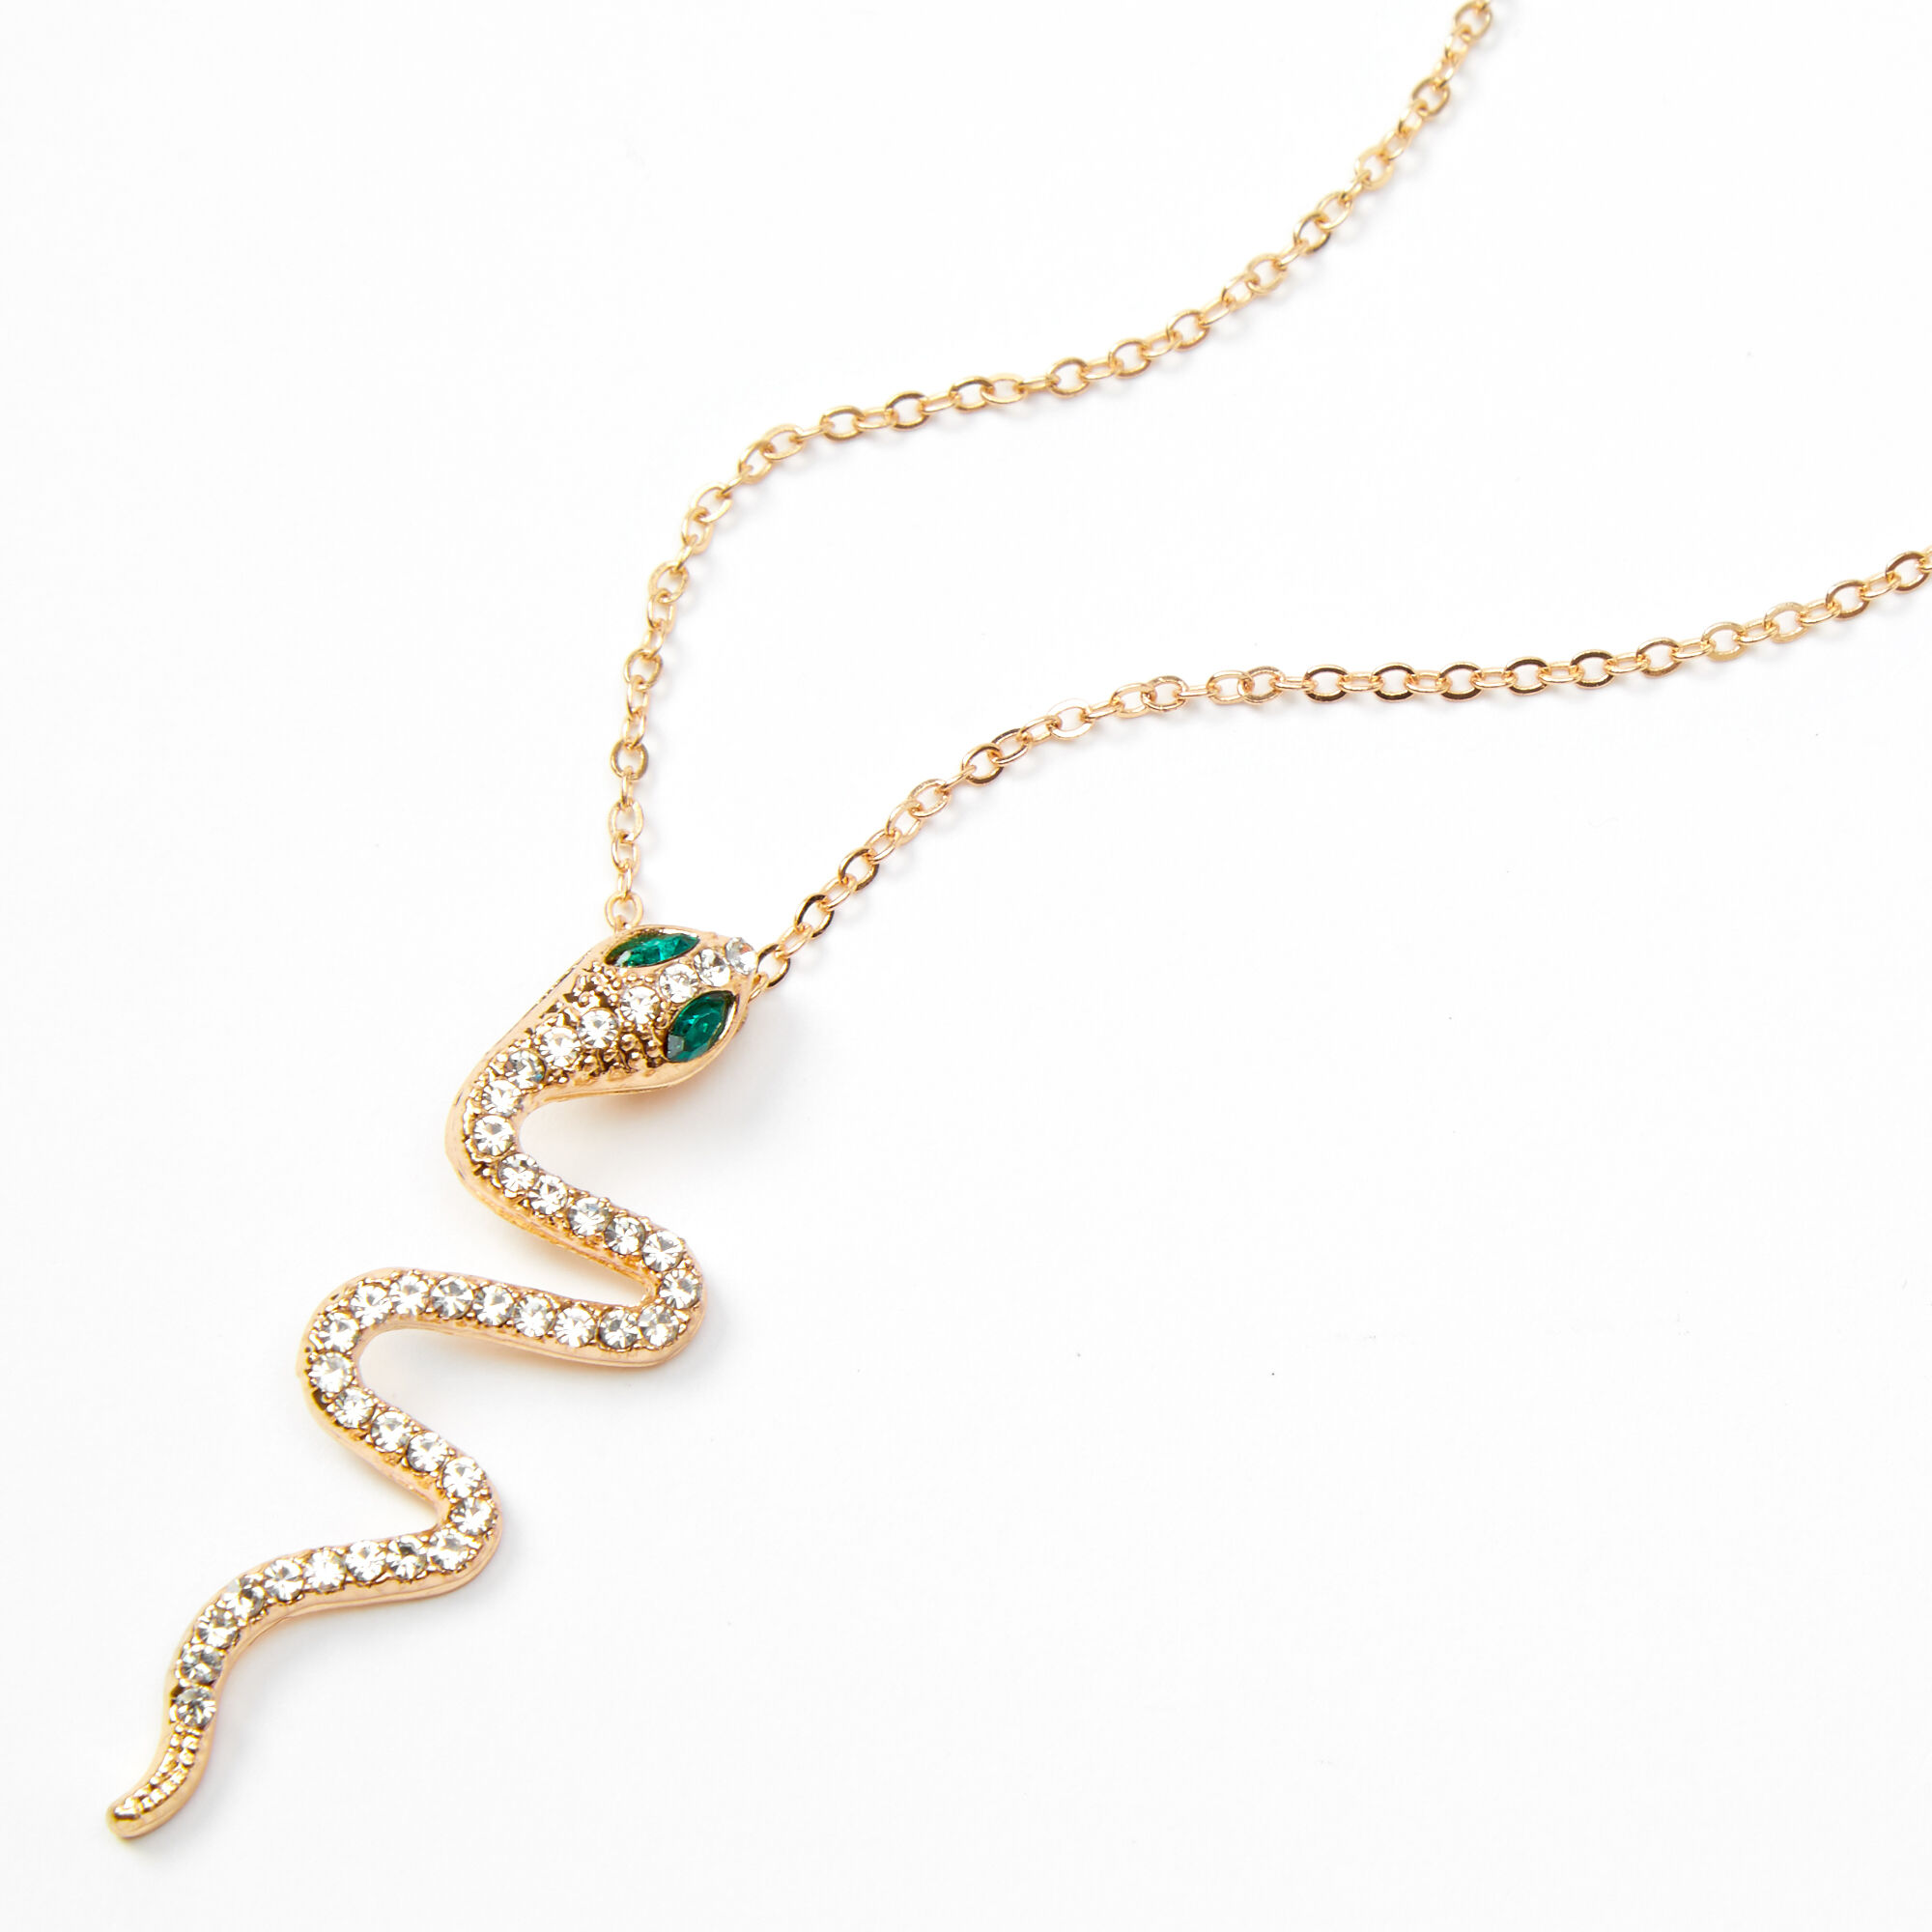 Snake Necklaces - Buy Snake Necklaces online in India